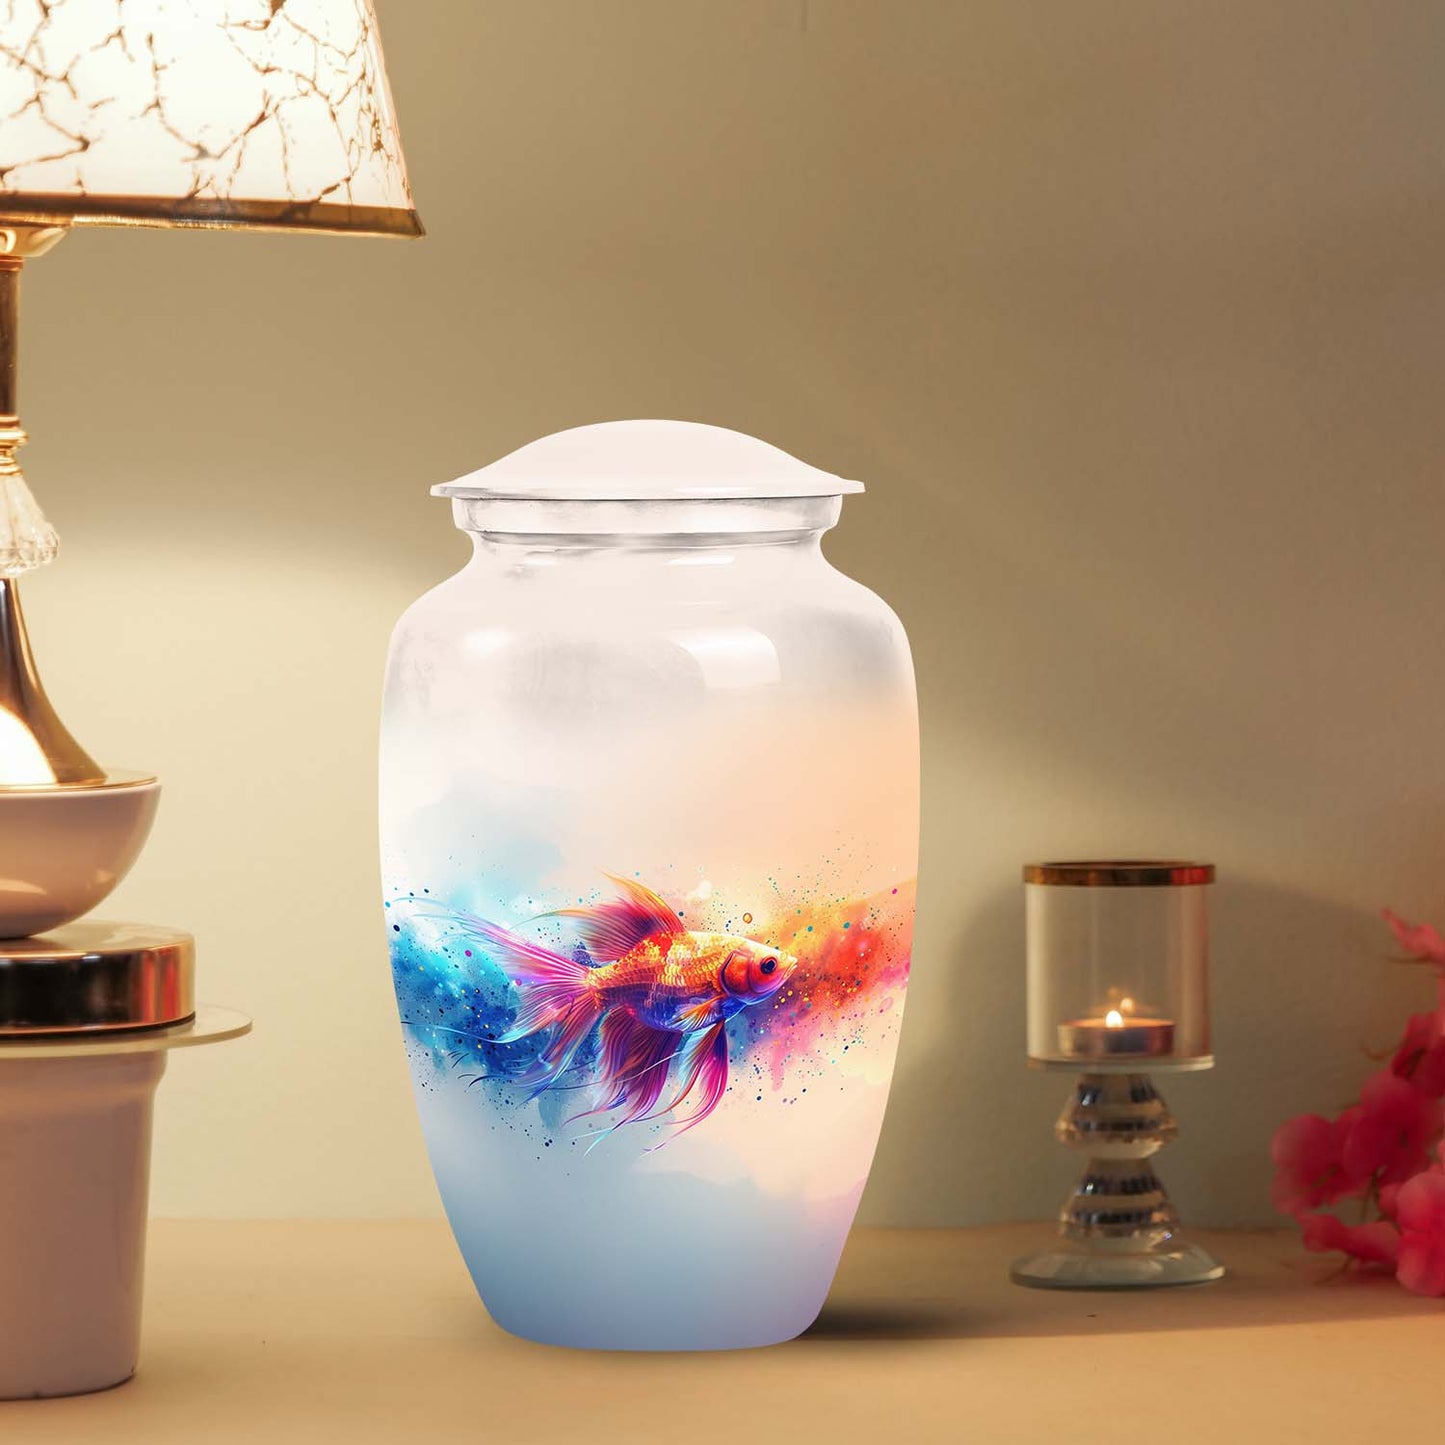 Large, colorful Fish Urn designed as dignified burial urn for human ashes, part of metal cremation urn product range